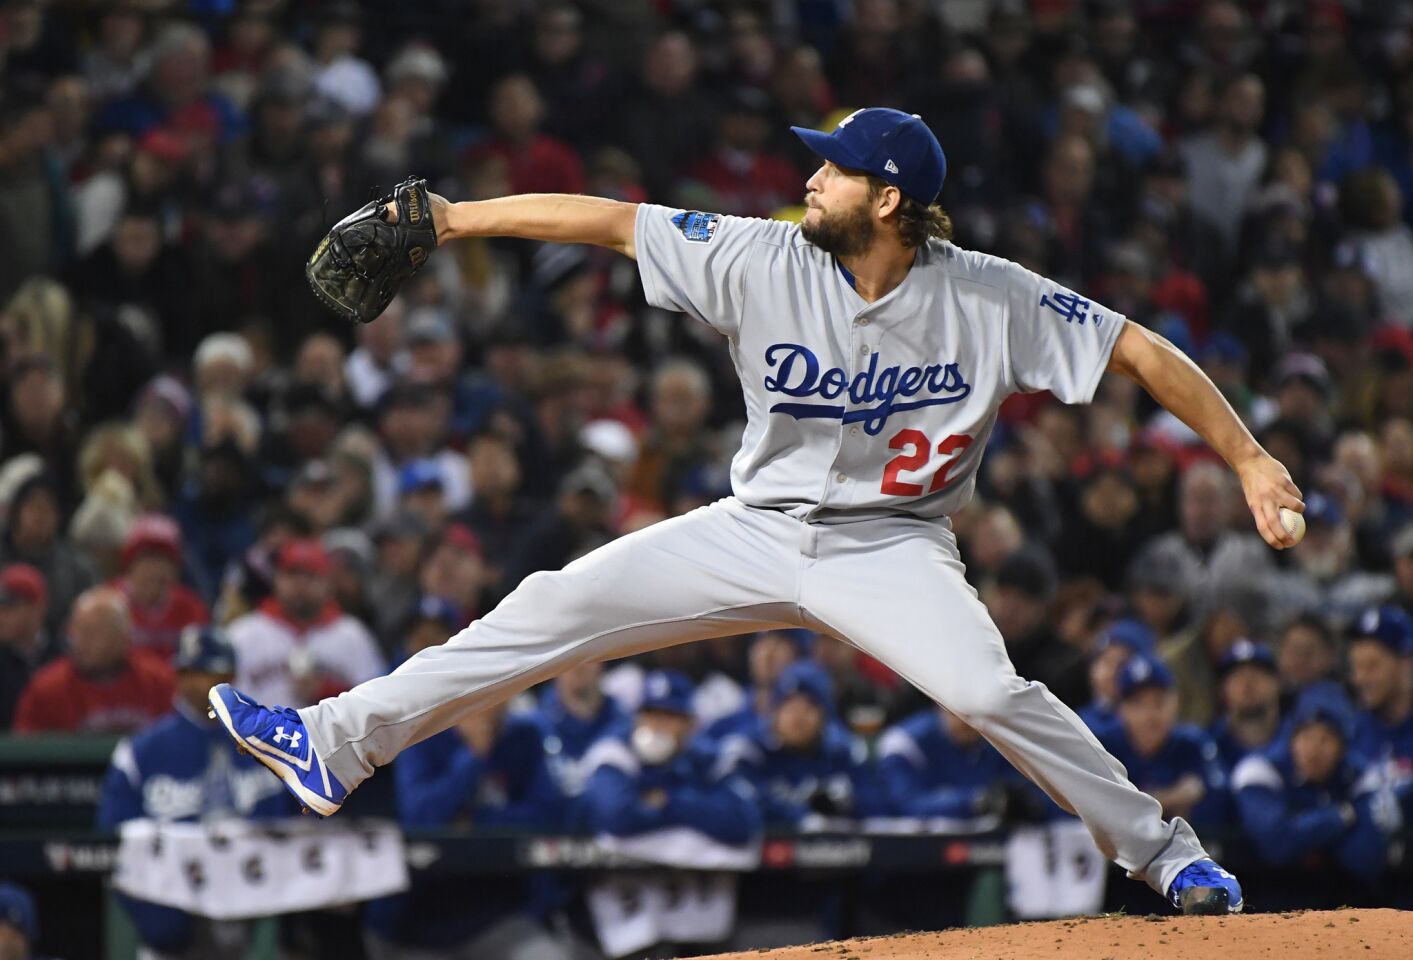 Dodgers starting pitcher Clayton Kershaw throws in the first inning.